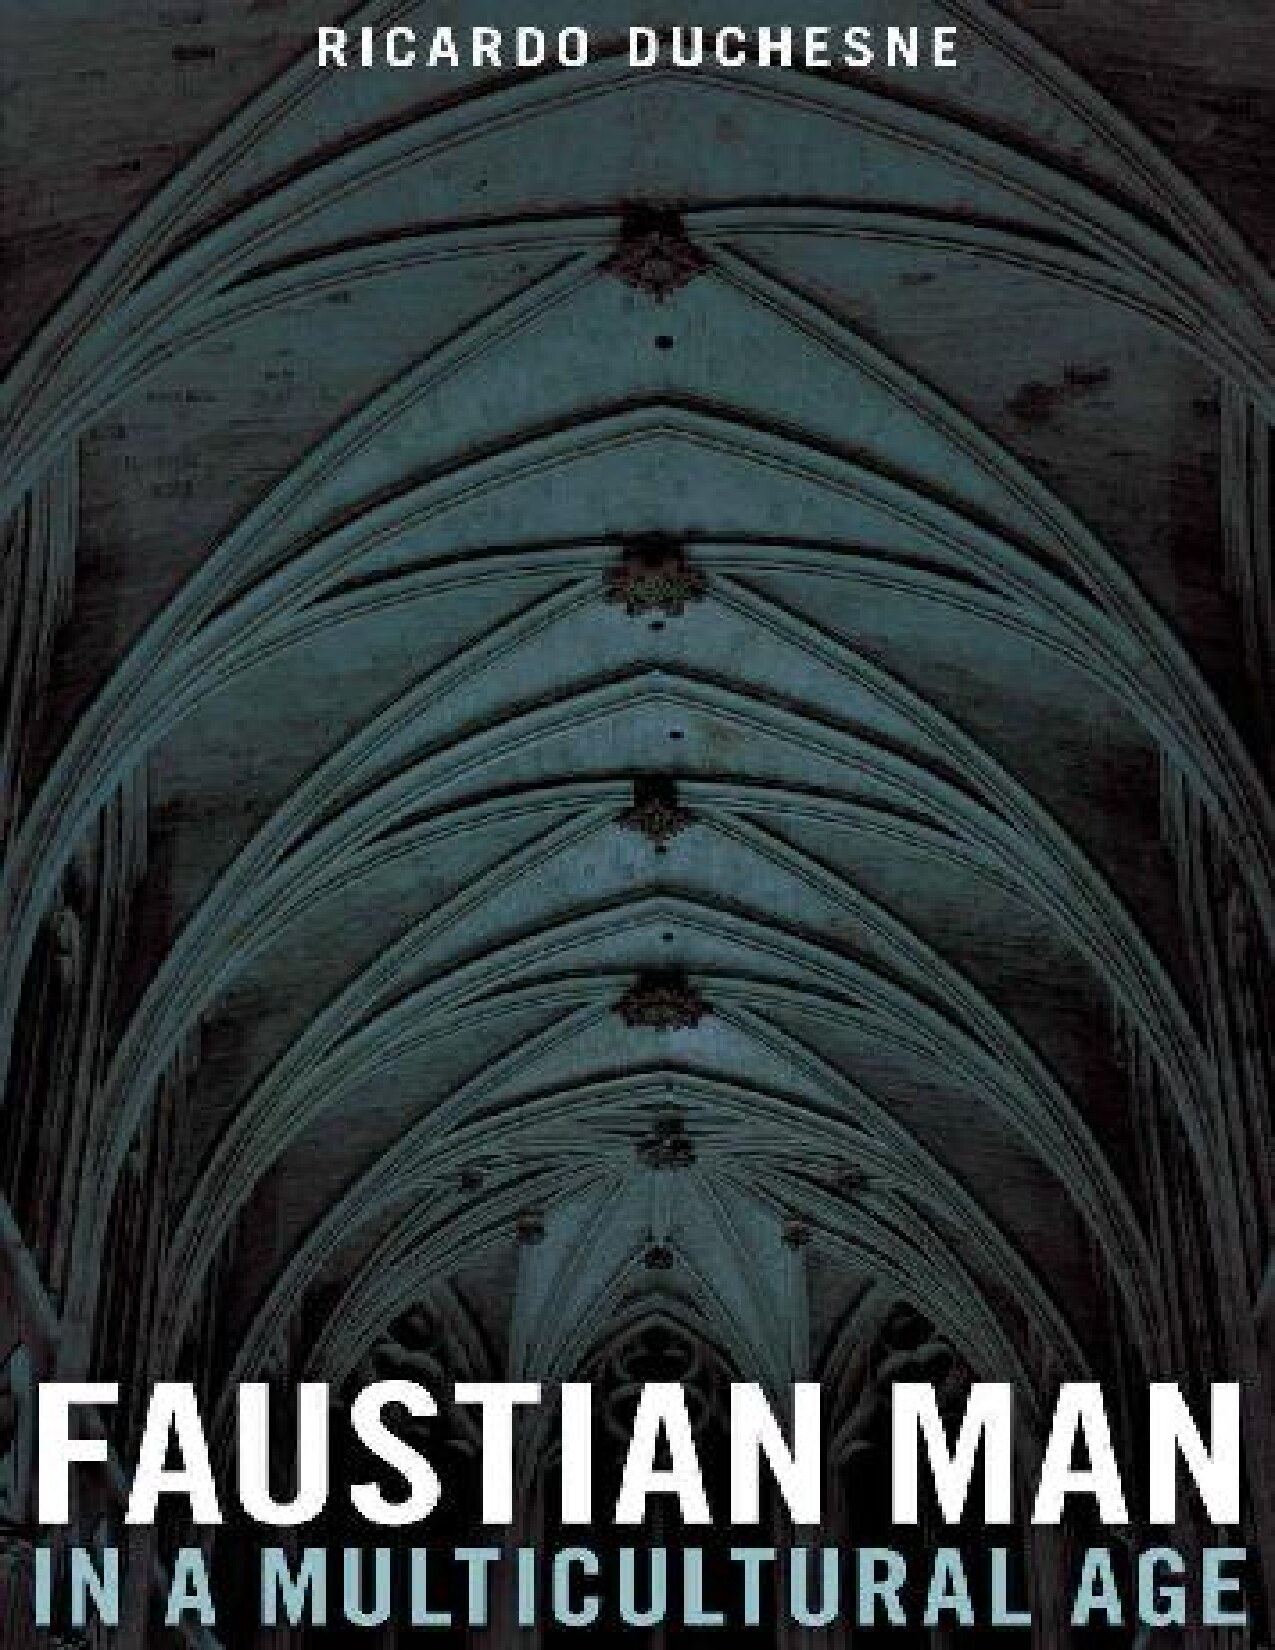 Faustian Man in a Multicultural Age